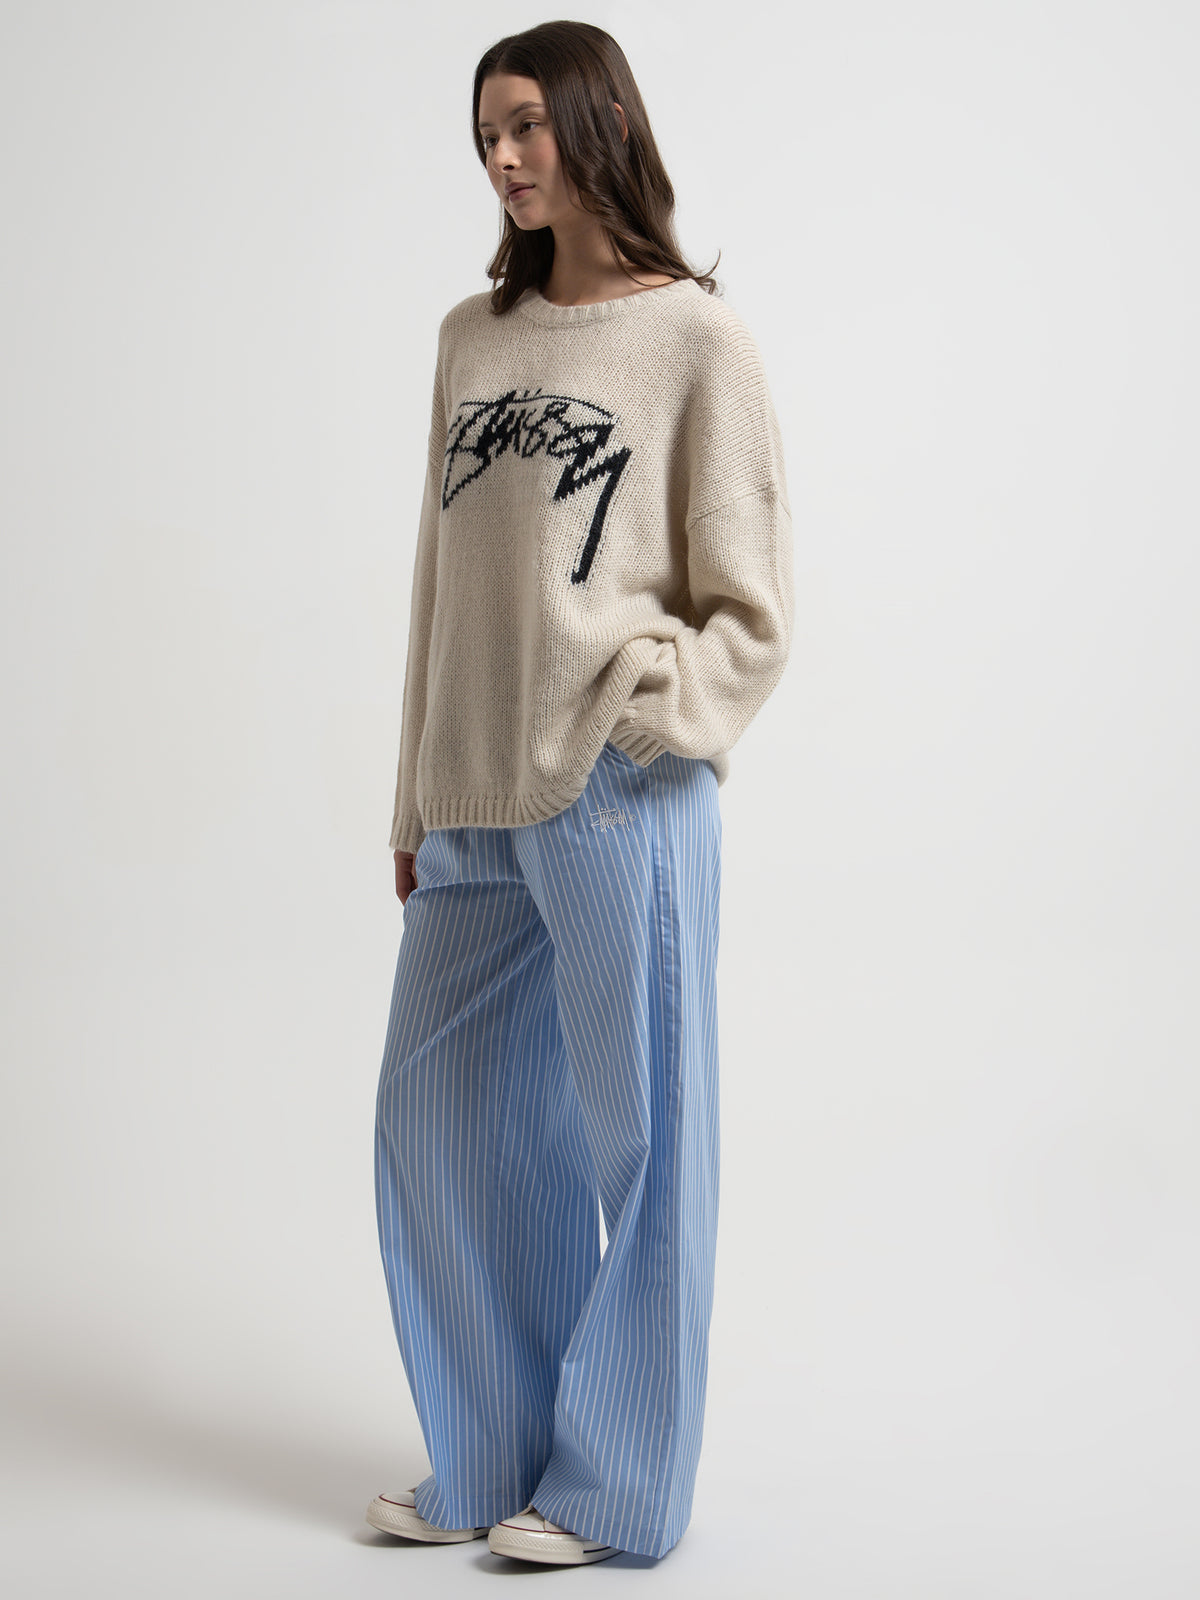 Smooth Stock Oversized Knit in Cream